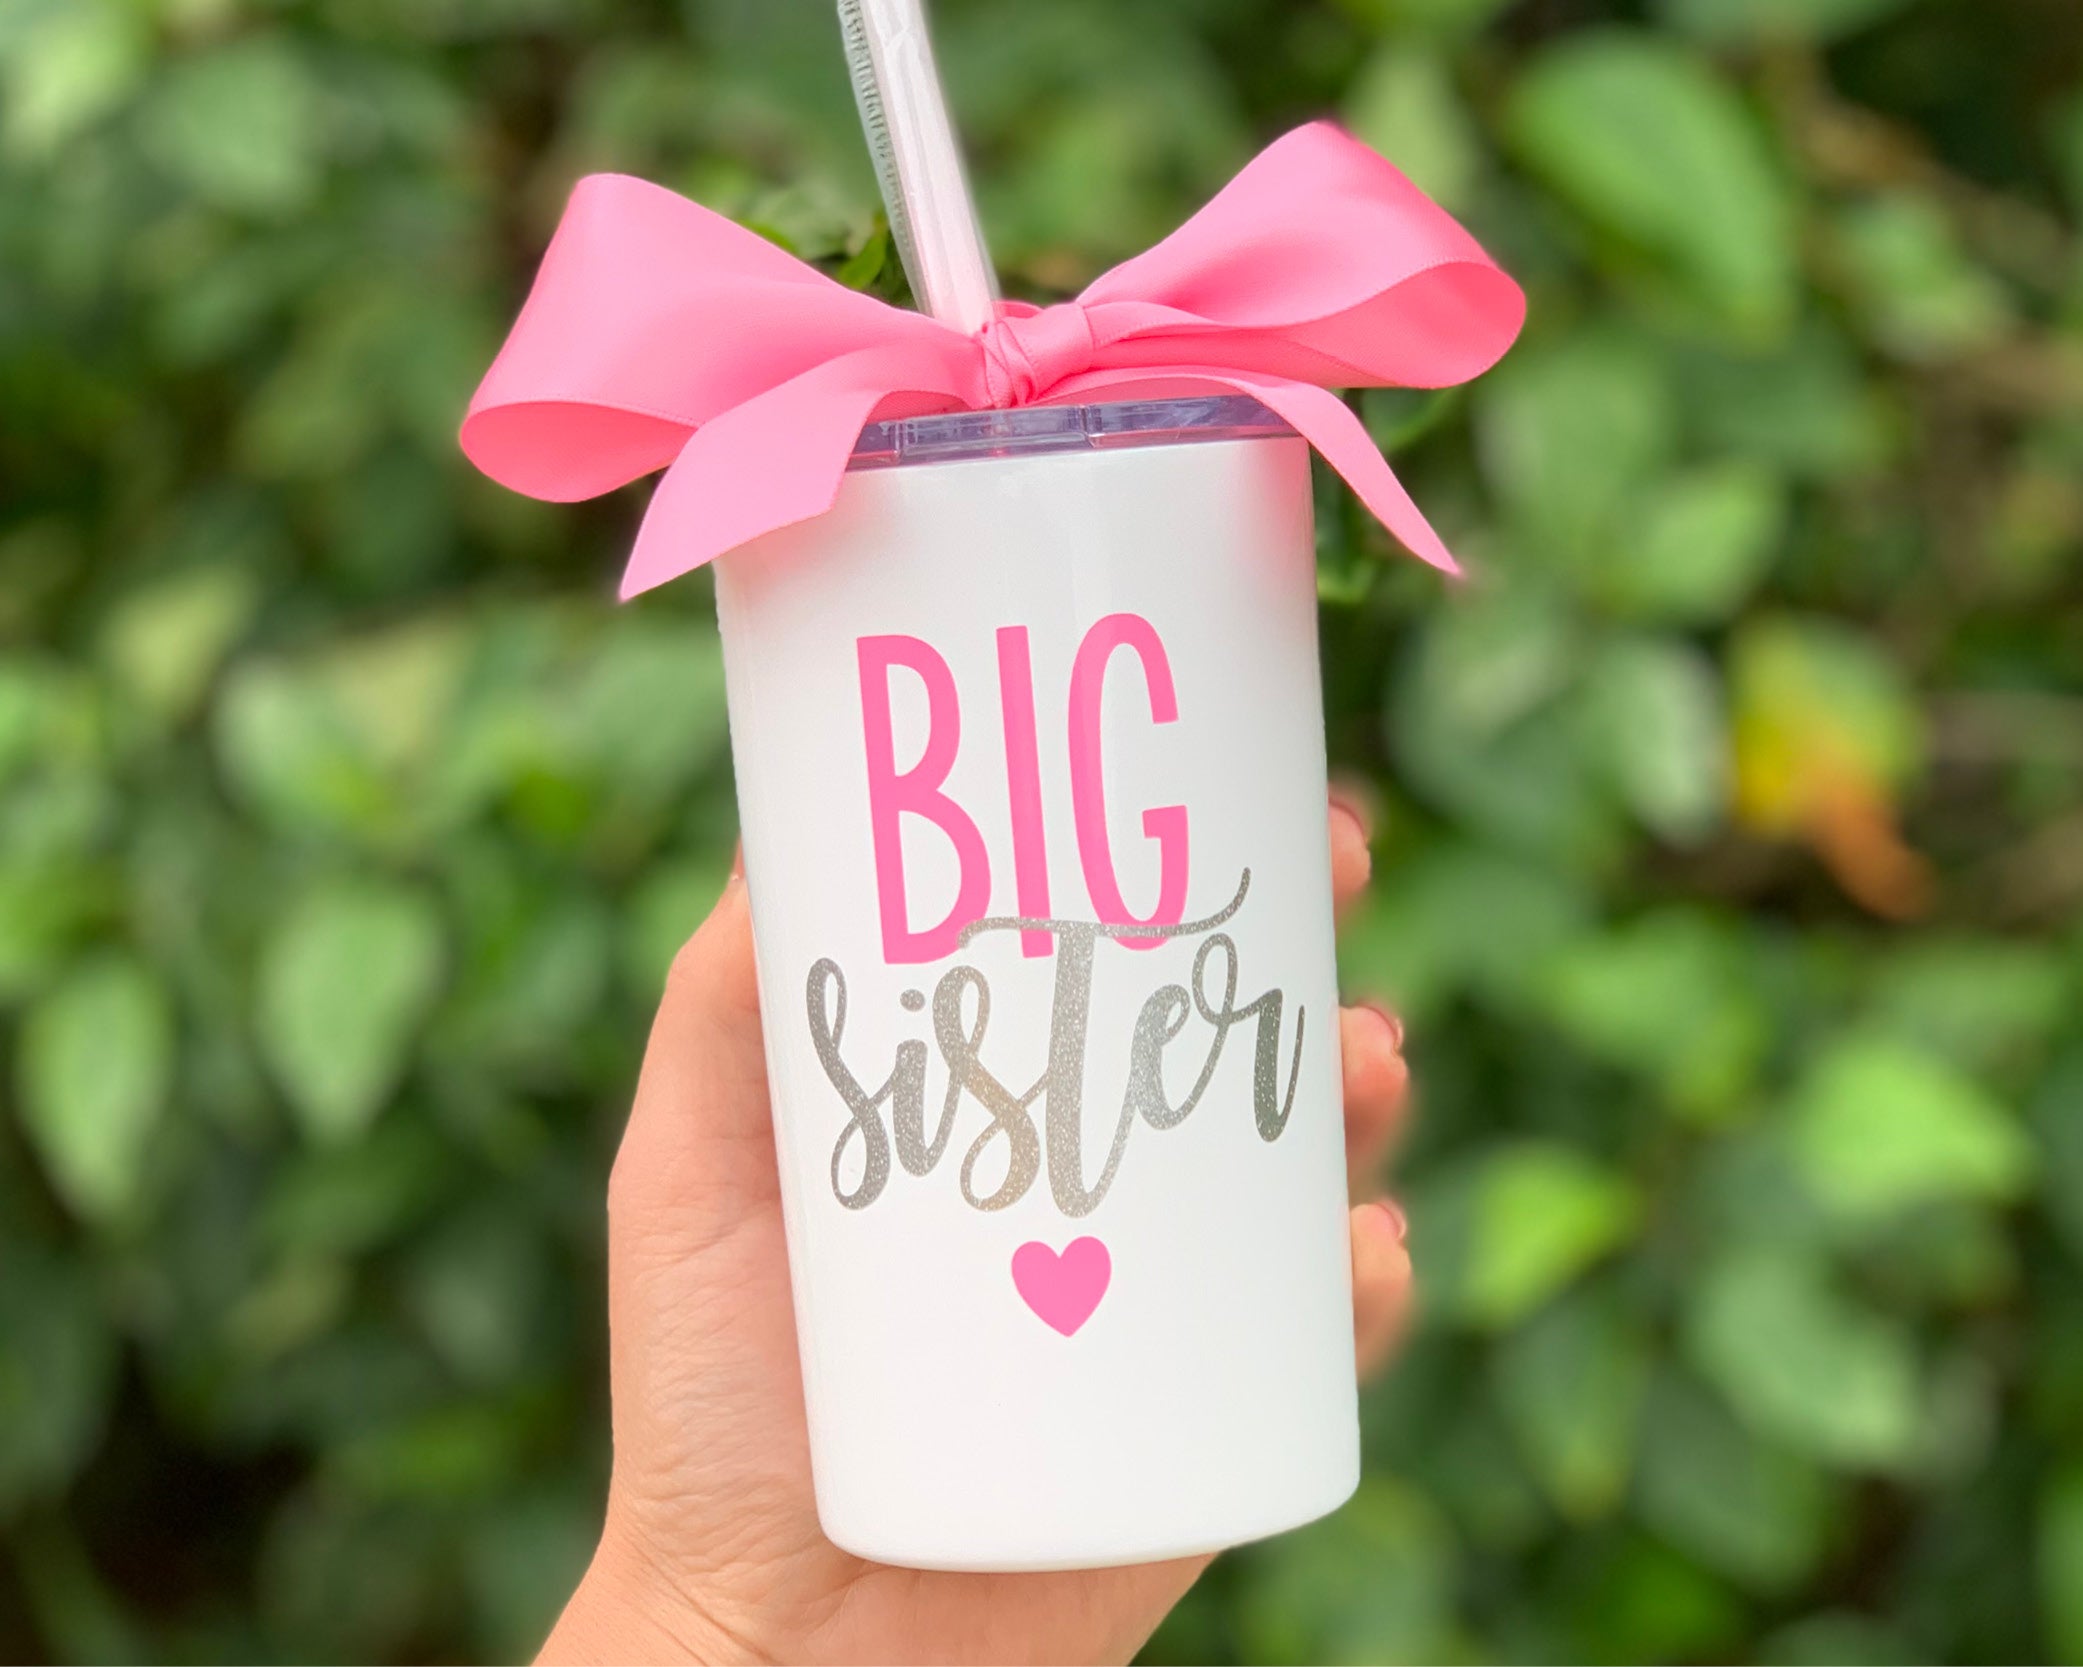 Big Sister Little Sister 12oz Mini Skinny Stainless Steel Cup